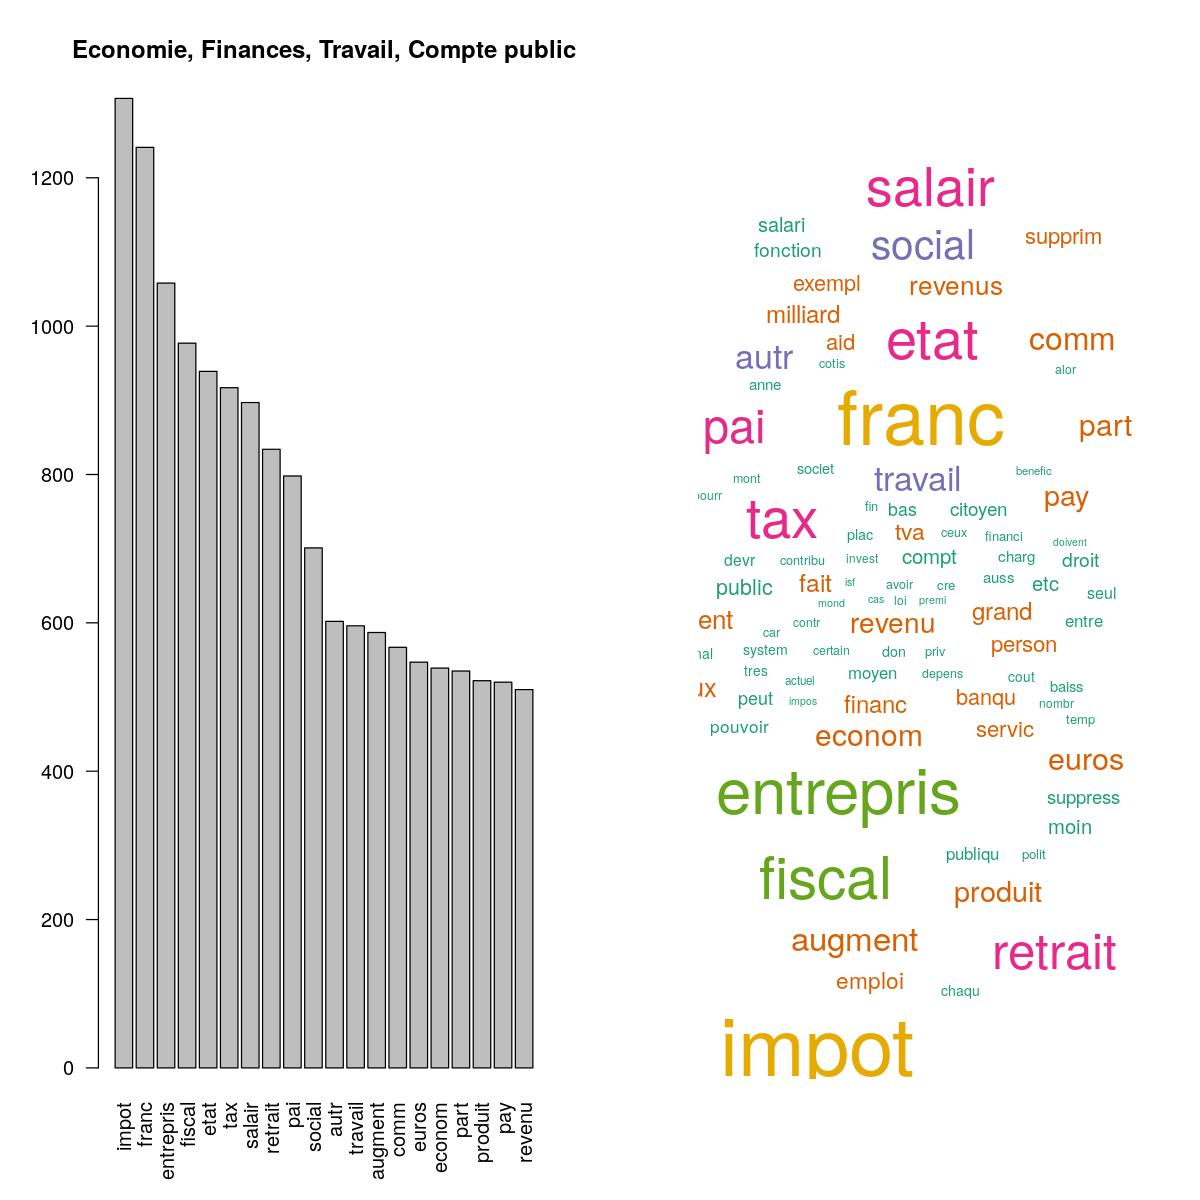 Exemple of a stemmed word cloud and frequency histogram.